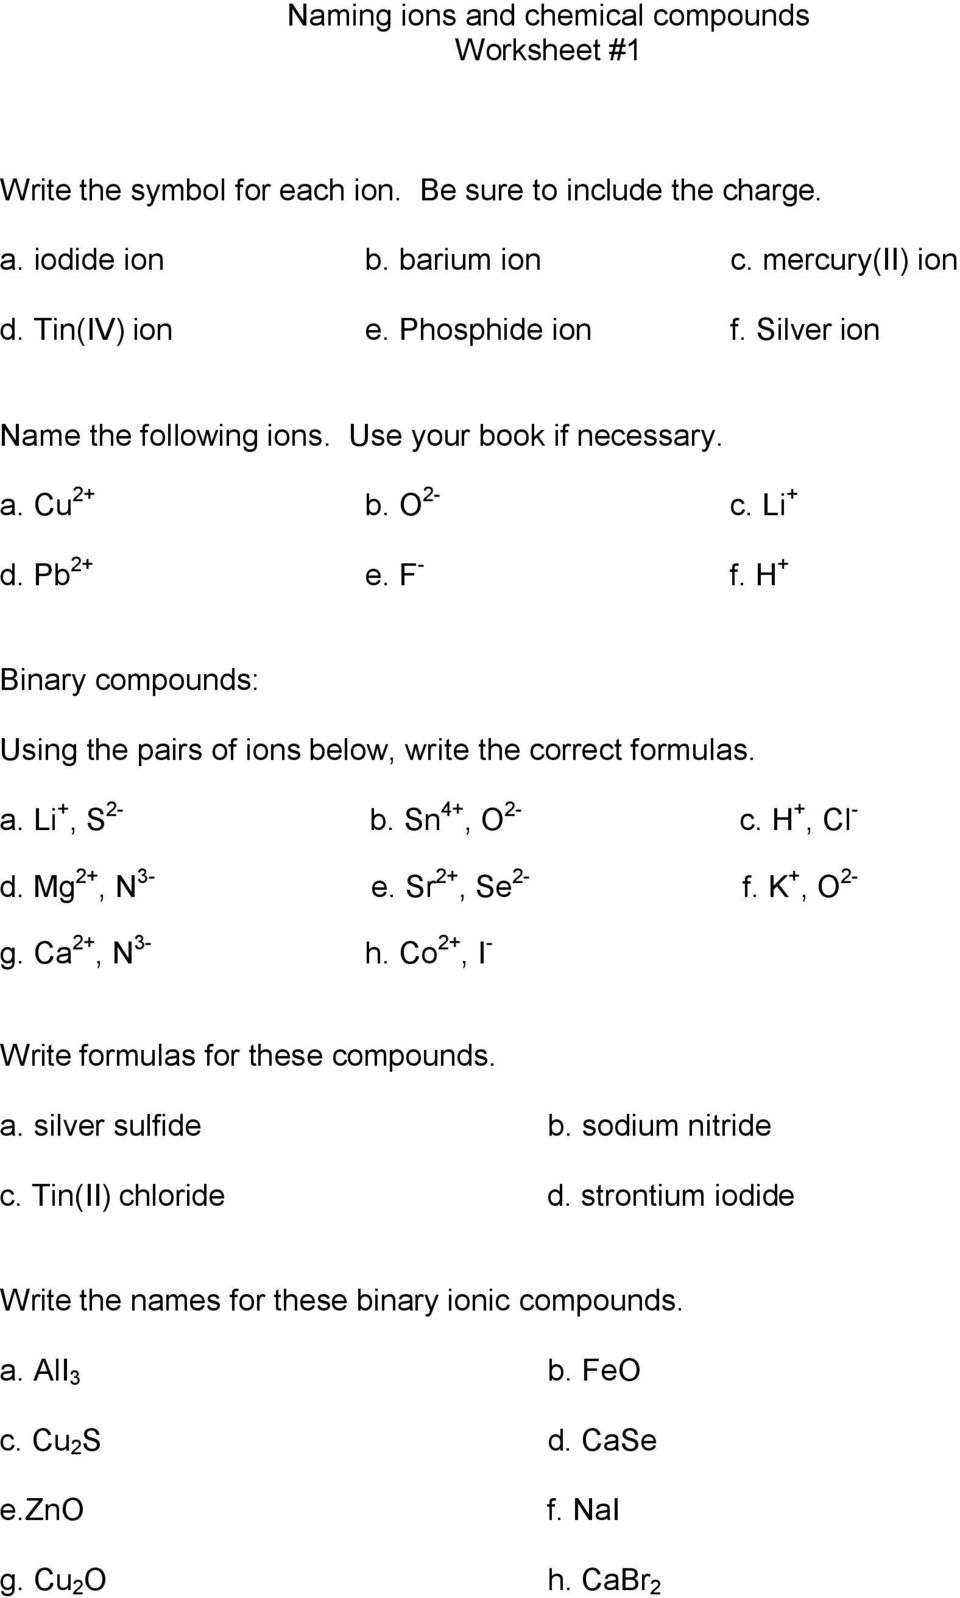 Naming Ions And Chemical Compounds Worksheet 1 A Iodide Ion B Barium Ion C Mercury Ii Ion D Tin Iv Ion E Phosphide Ion F Pdf Free Download